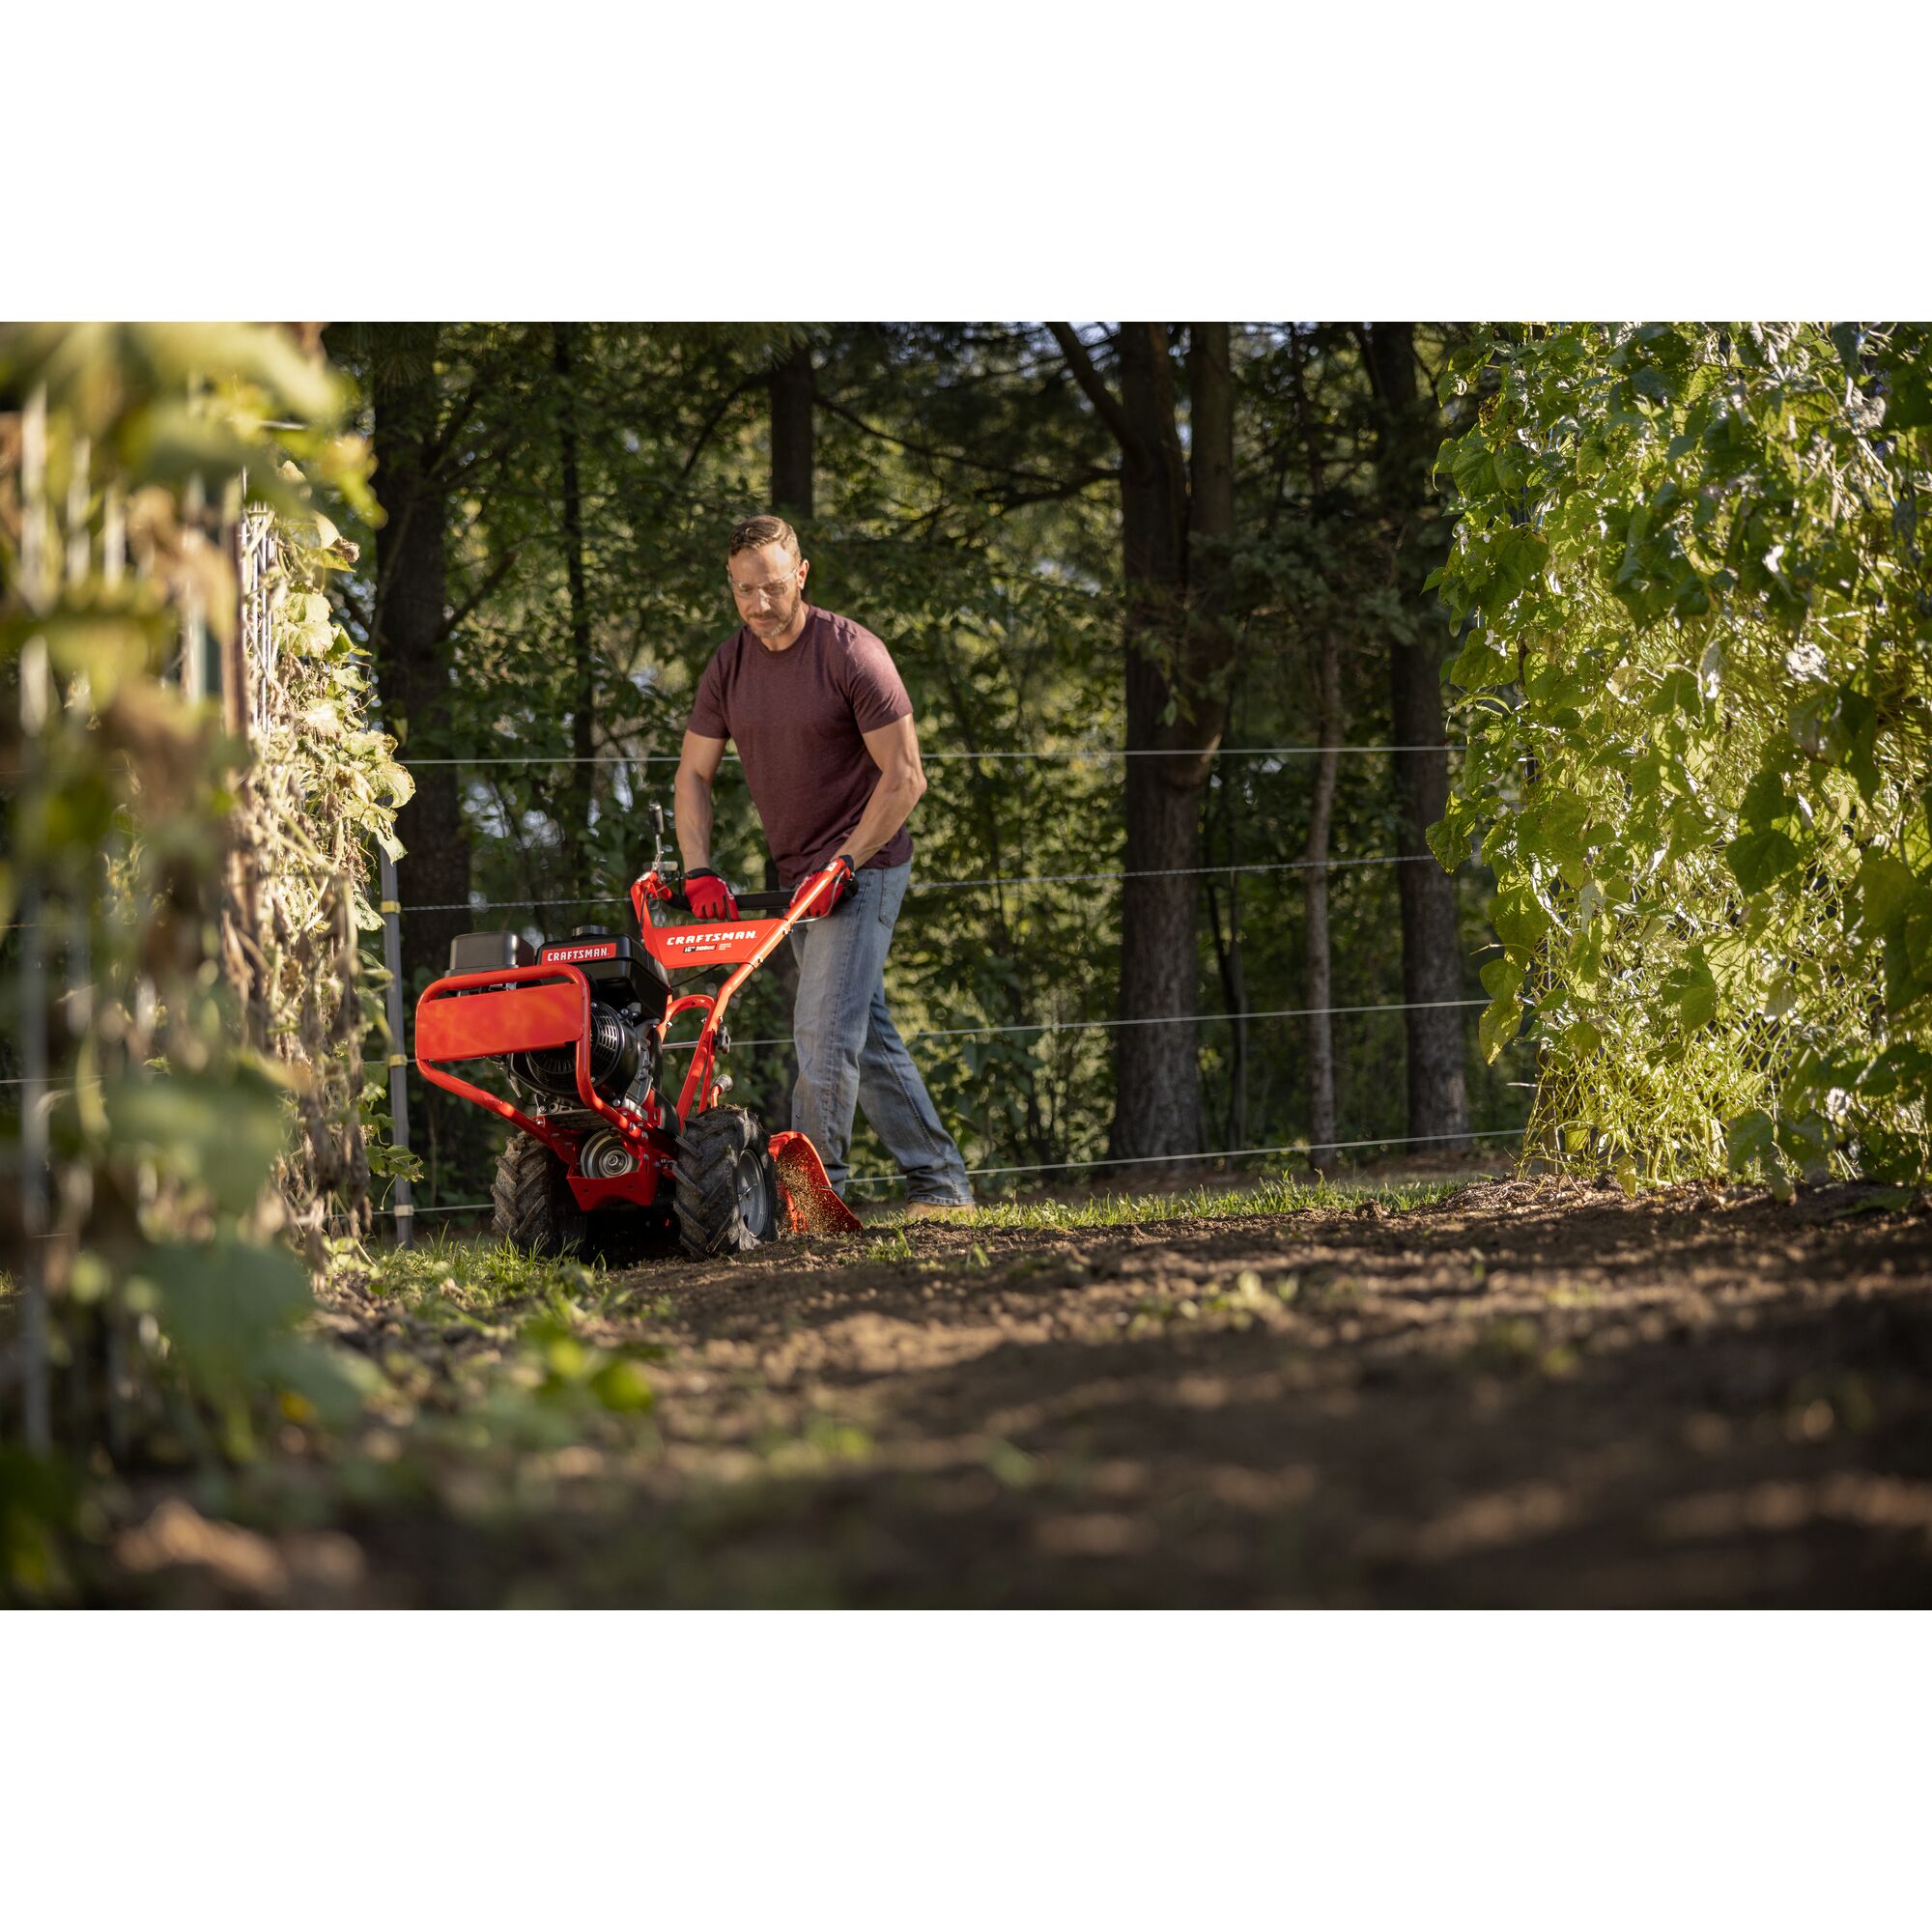 CRAFTSMAN 16-in. 208cc Gas Rear Tine Tiller tilling garden area with trees in background